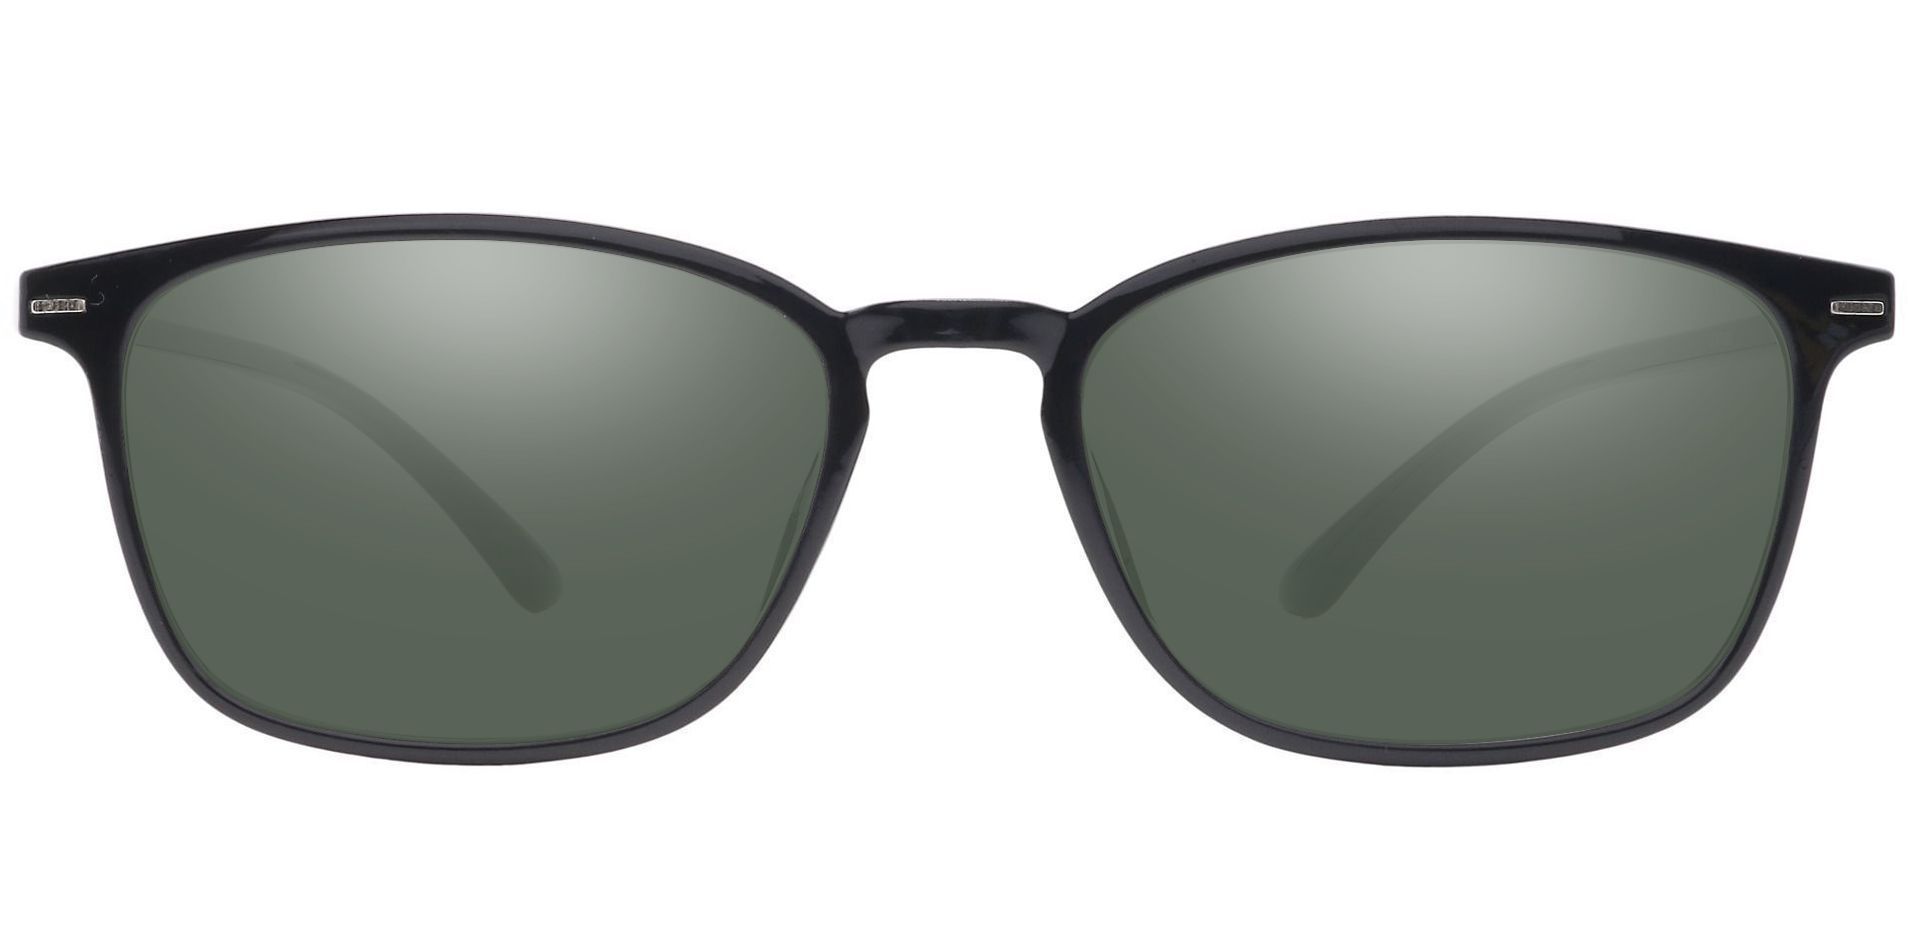 Cabo Oval Reading Sunglasses - Black Frame With Green Lenses